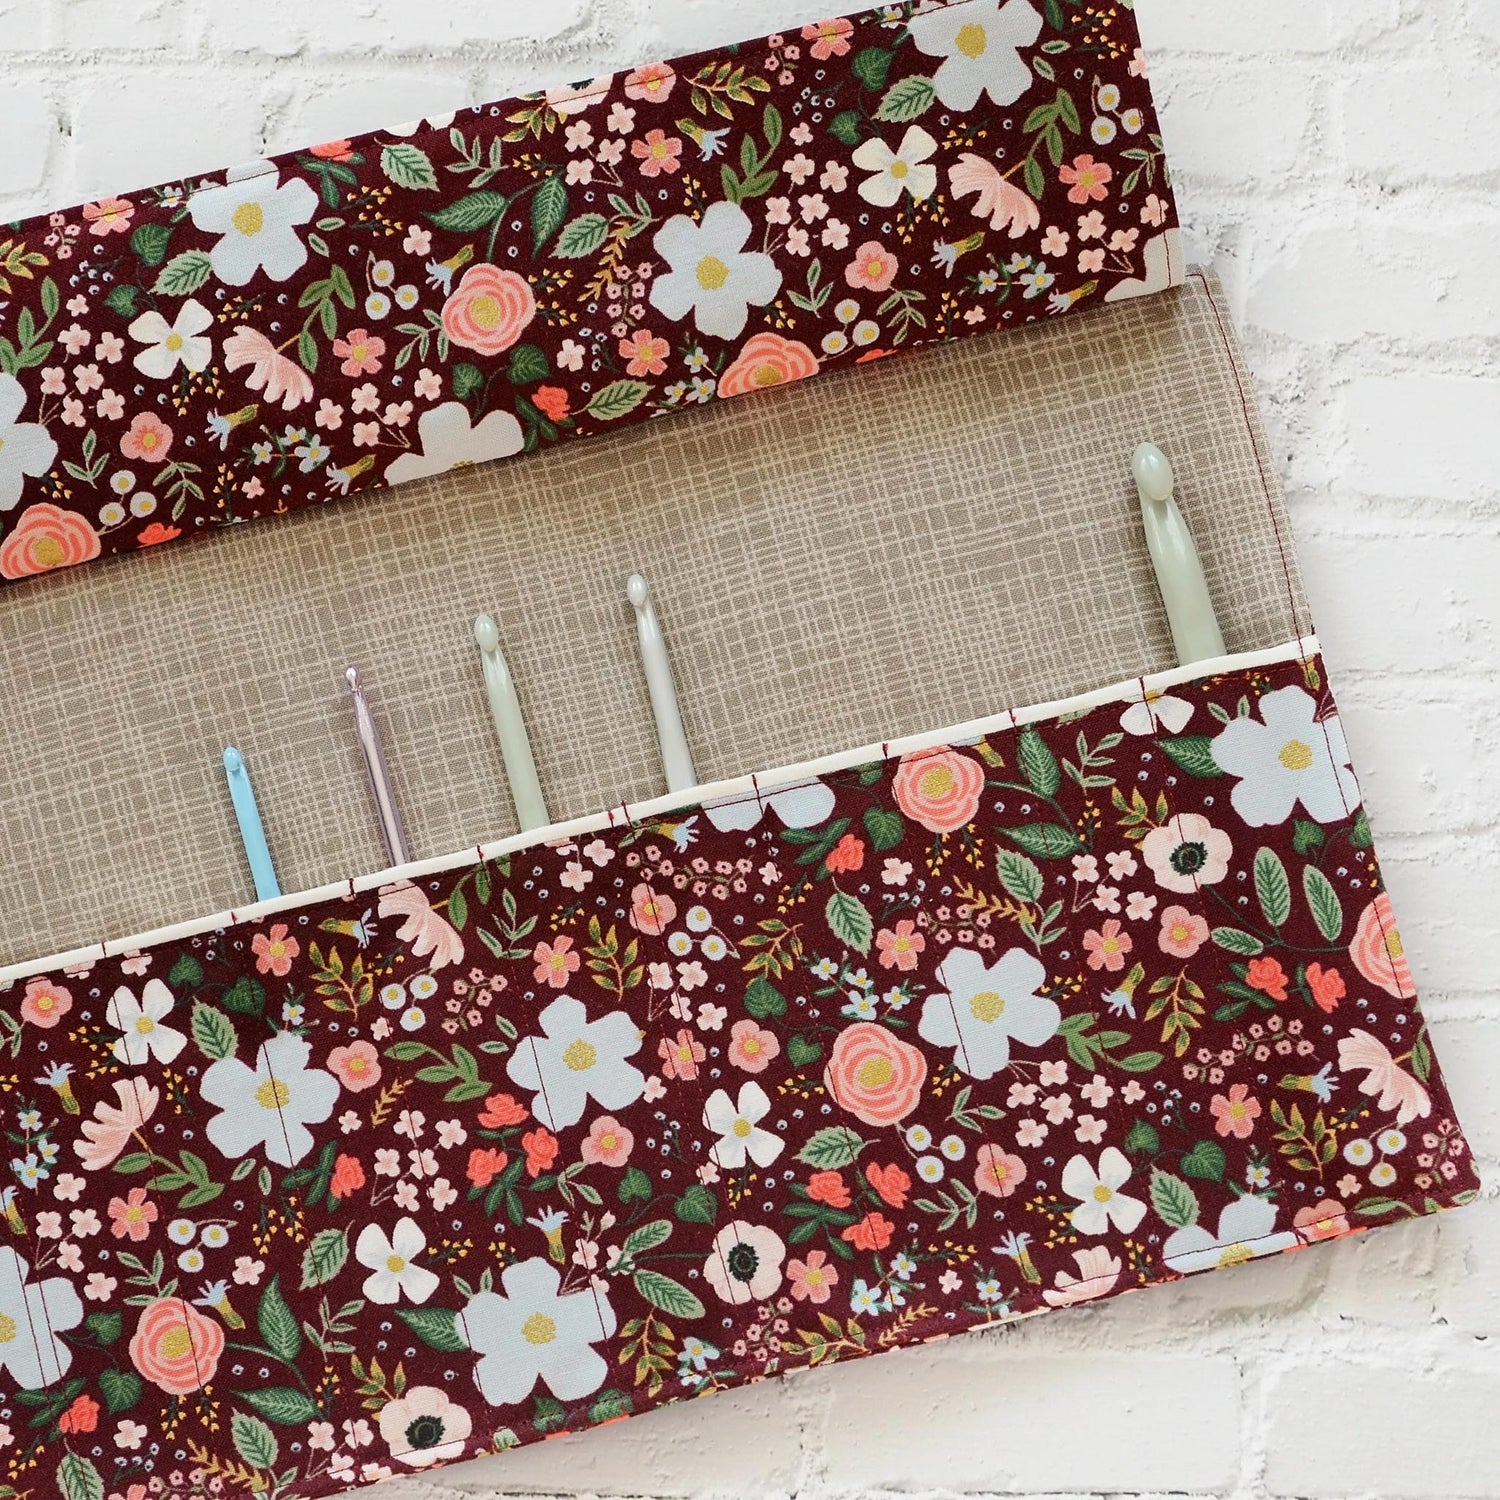 Quilted crochet hook wrap in burgundy floral Rifle Paper Co fabric.  Made in Canada by Yellow Petal Handmade.